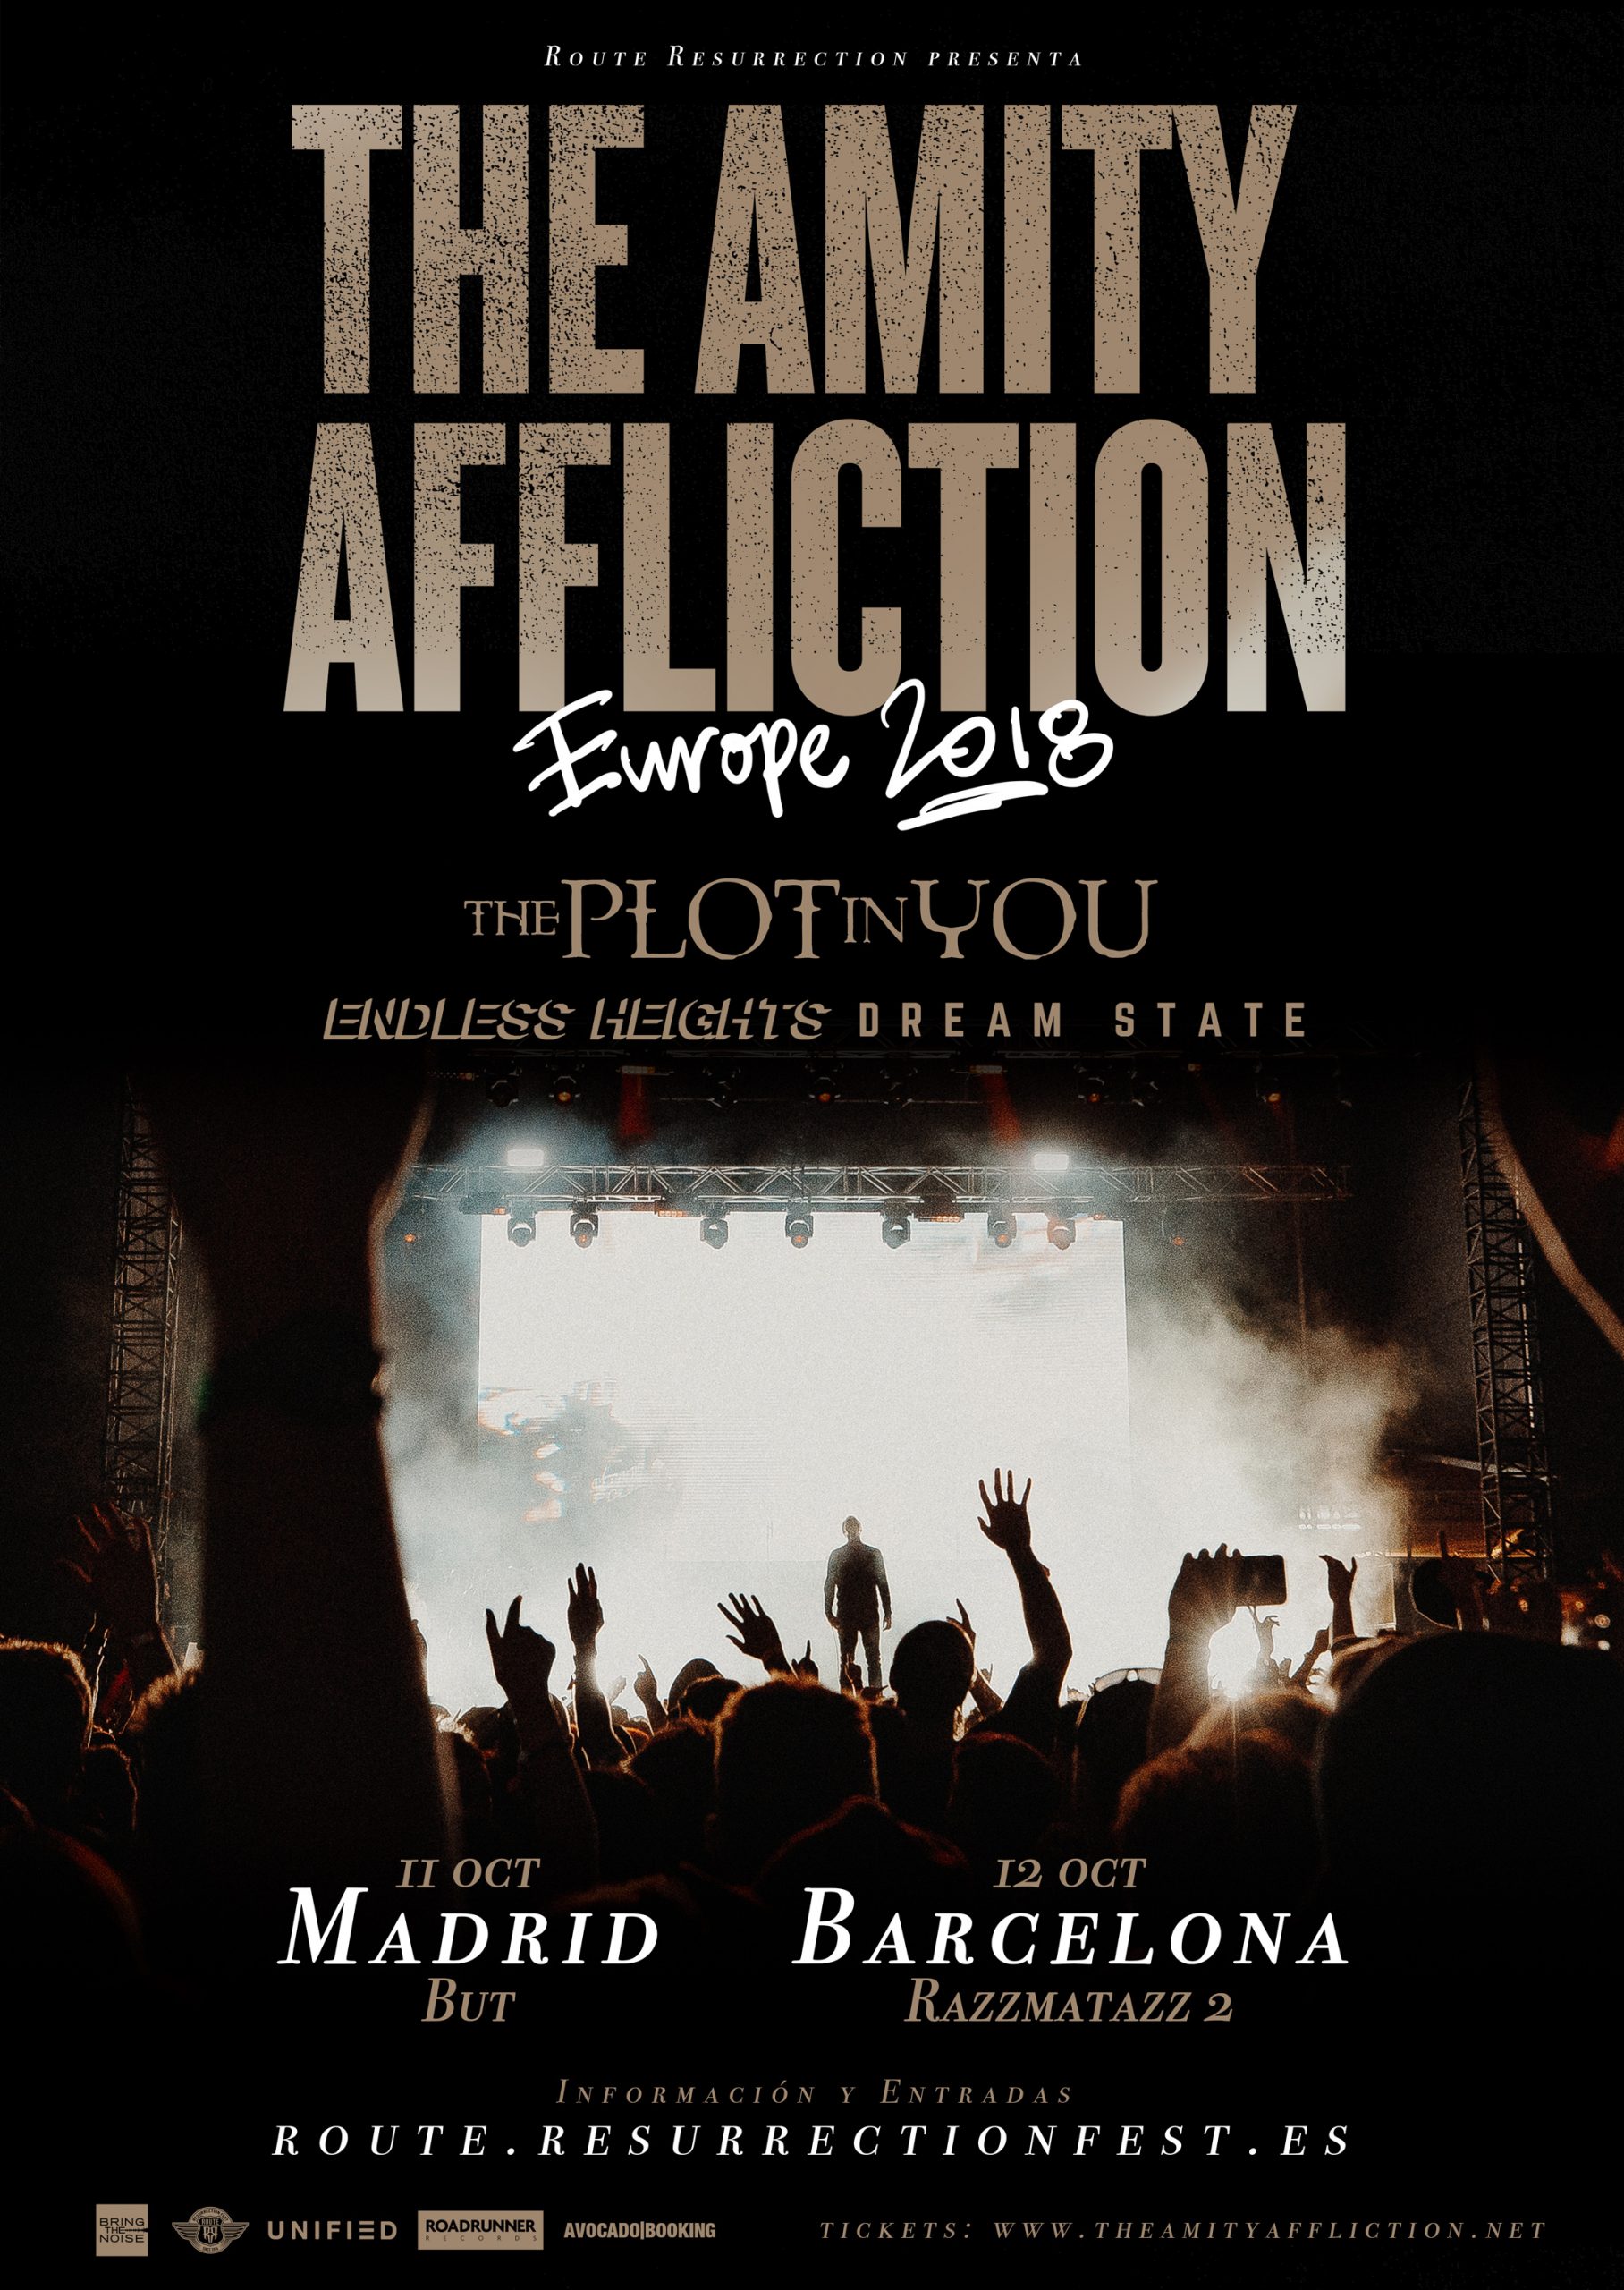 Route resurrection 2018 the amity affliction poster - rock and blog